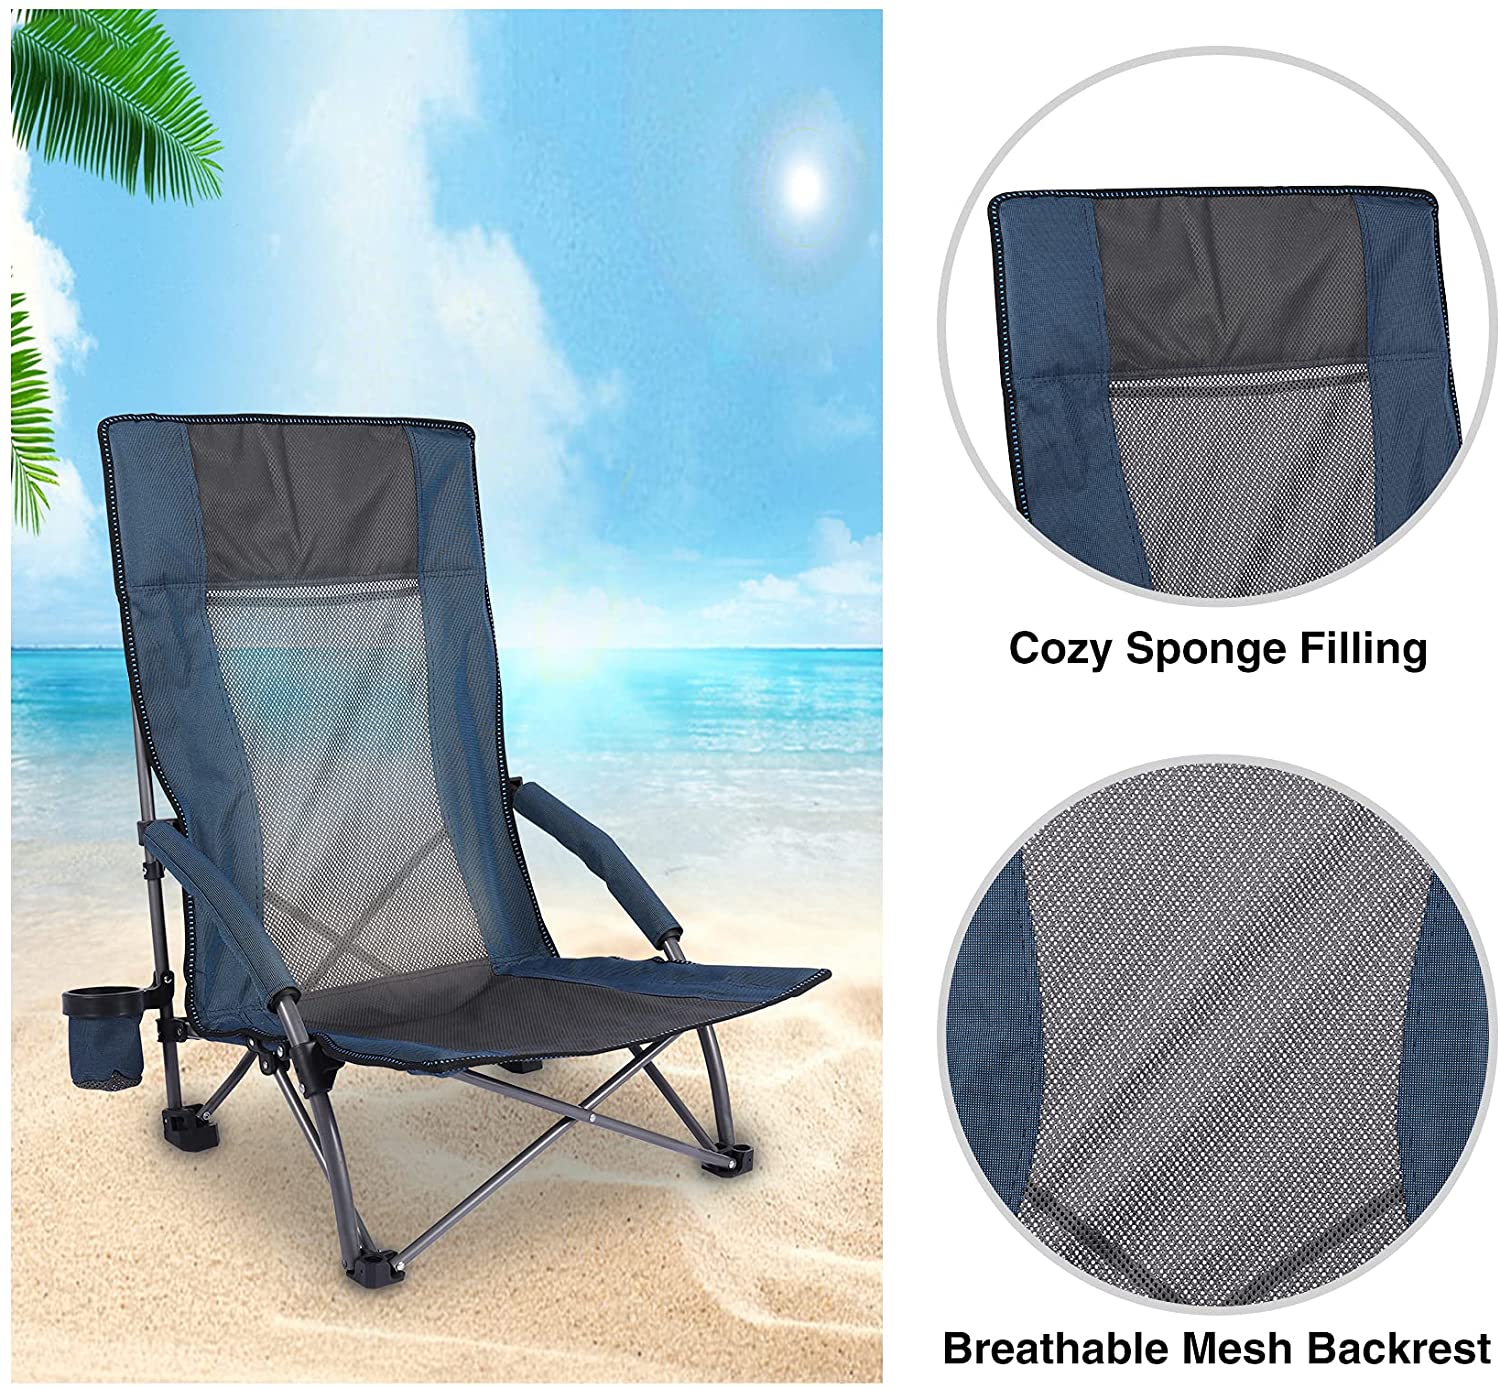 Lineslife Folding Beach Chair High Back for Adults, 2 Pack Low Seat Lightweight Concert Chairs Portable for Camping Lawn Outdoor Travel, Blue - image 2 of 7